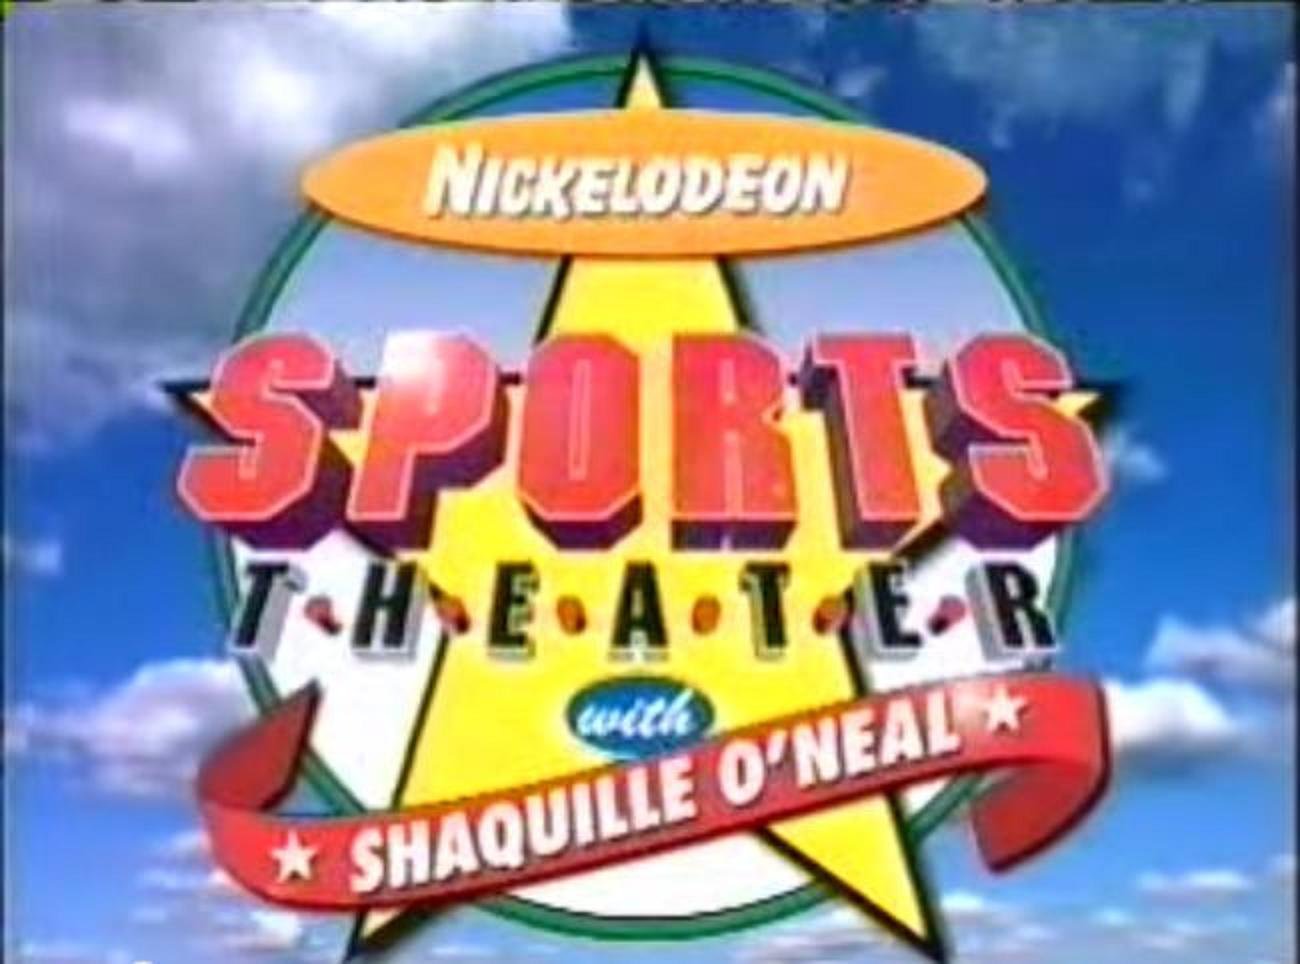 Sports Theater with Shaquille O'Neal